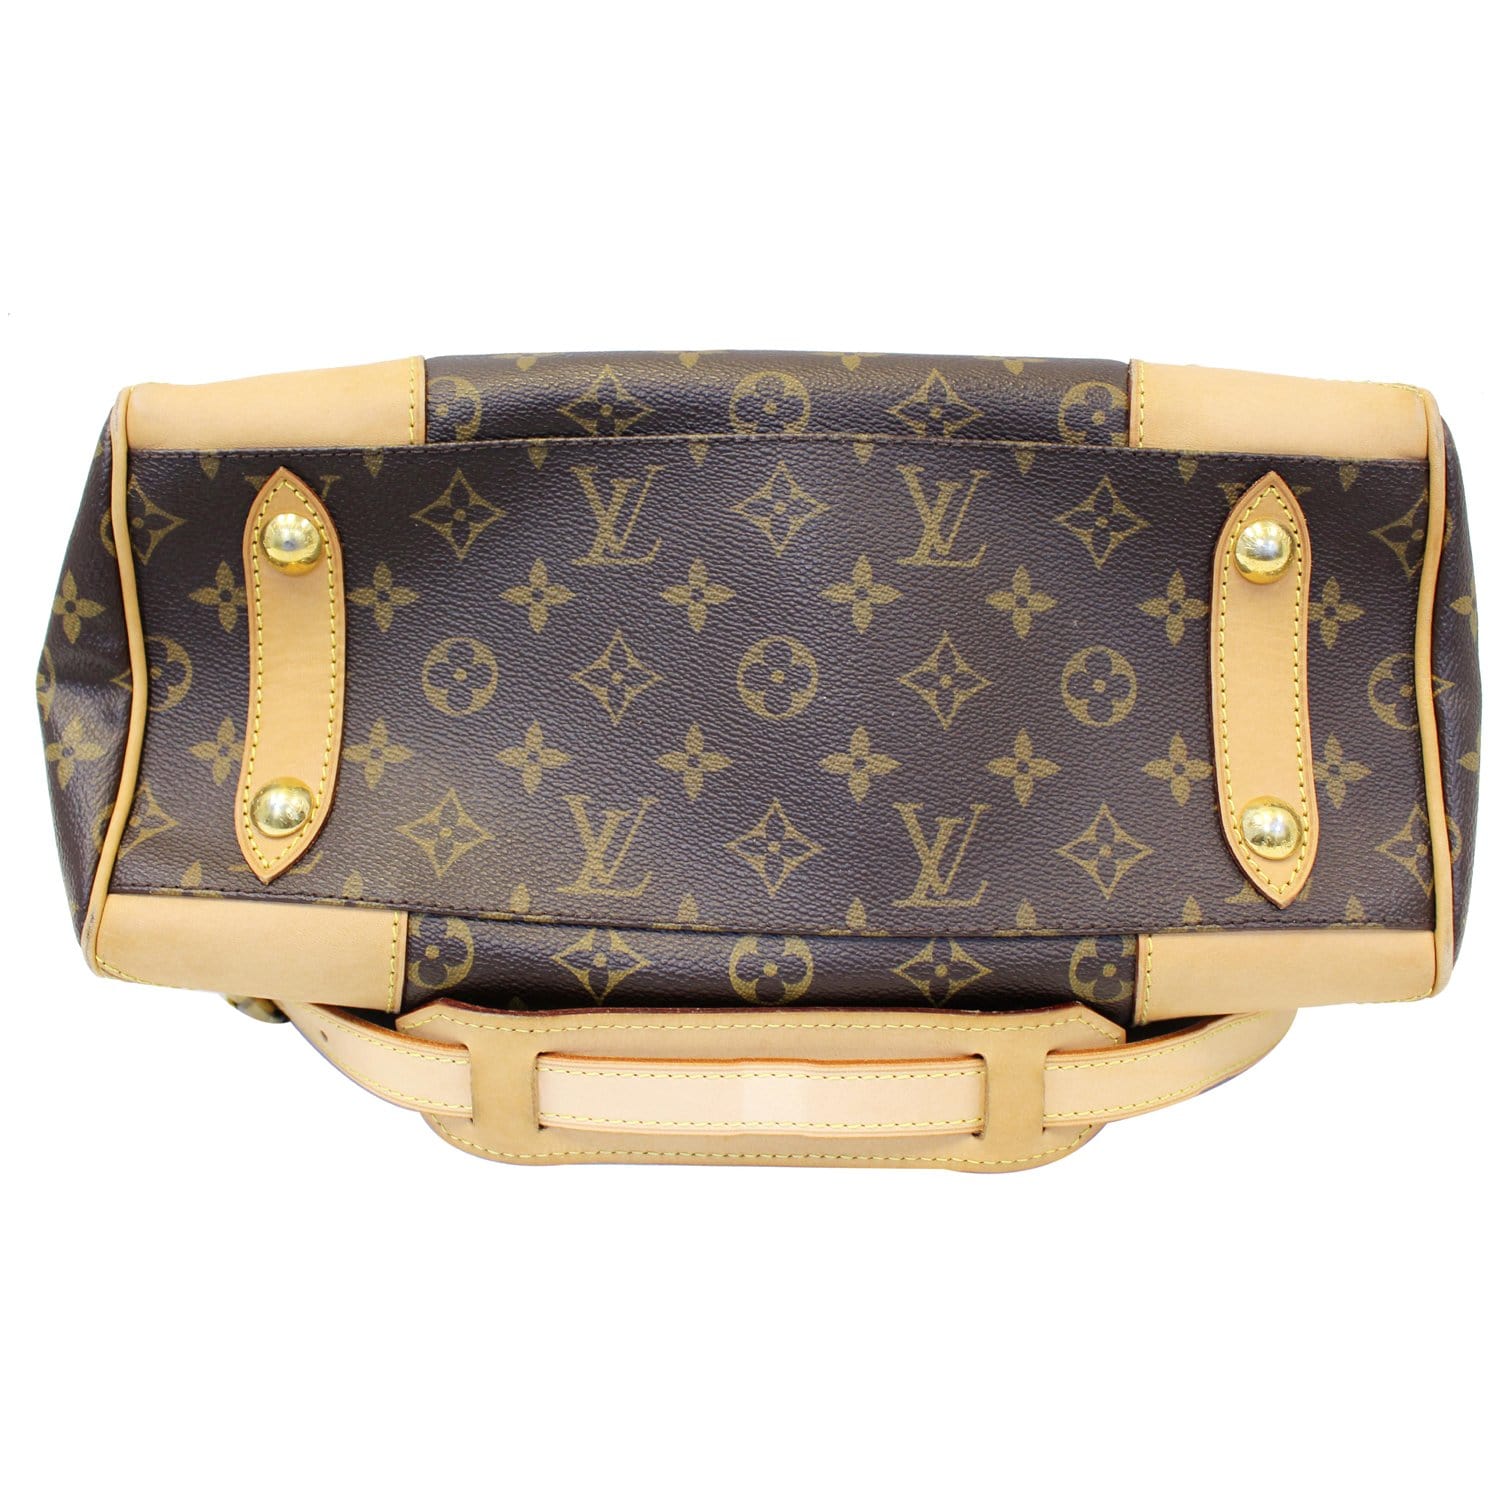 [Date Code & Stamp] Louis Vuitton Totally PM Monogram Canvas